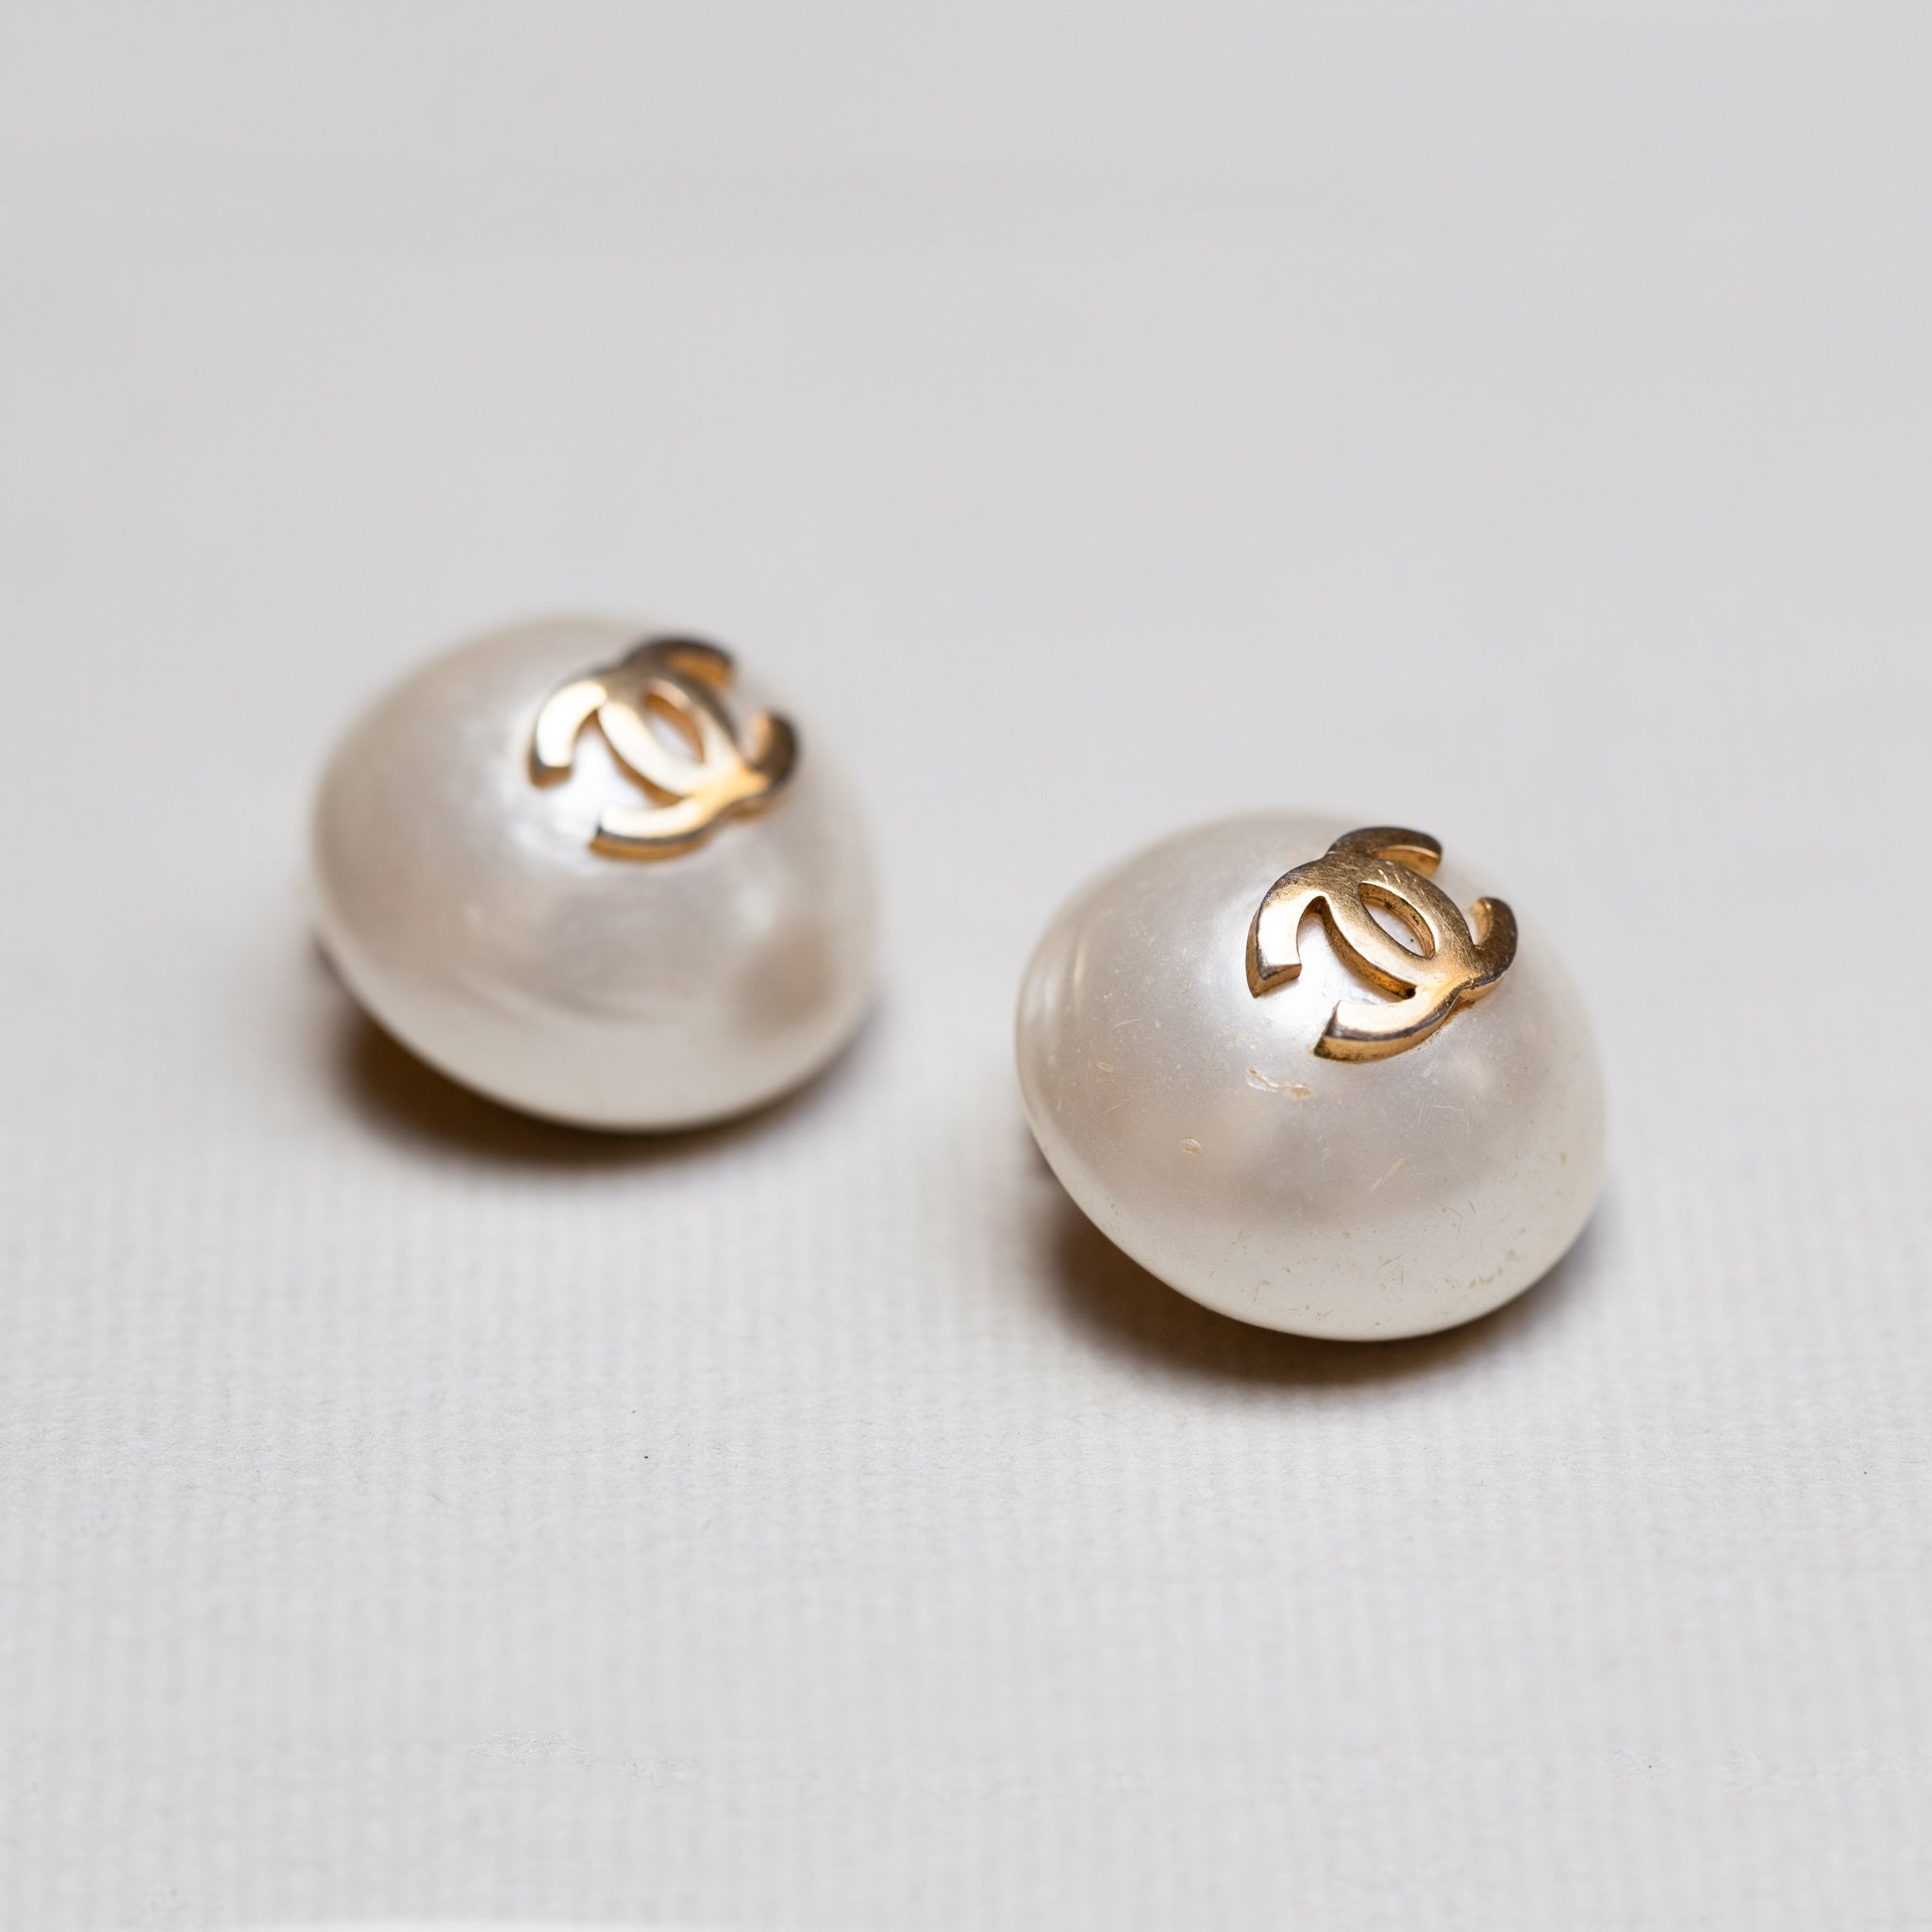 Authentic Chanel Vintage Classic CC with Pearl Drop Clip on Earrings